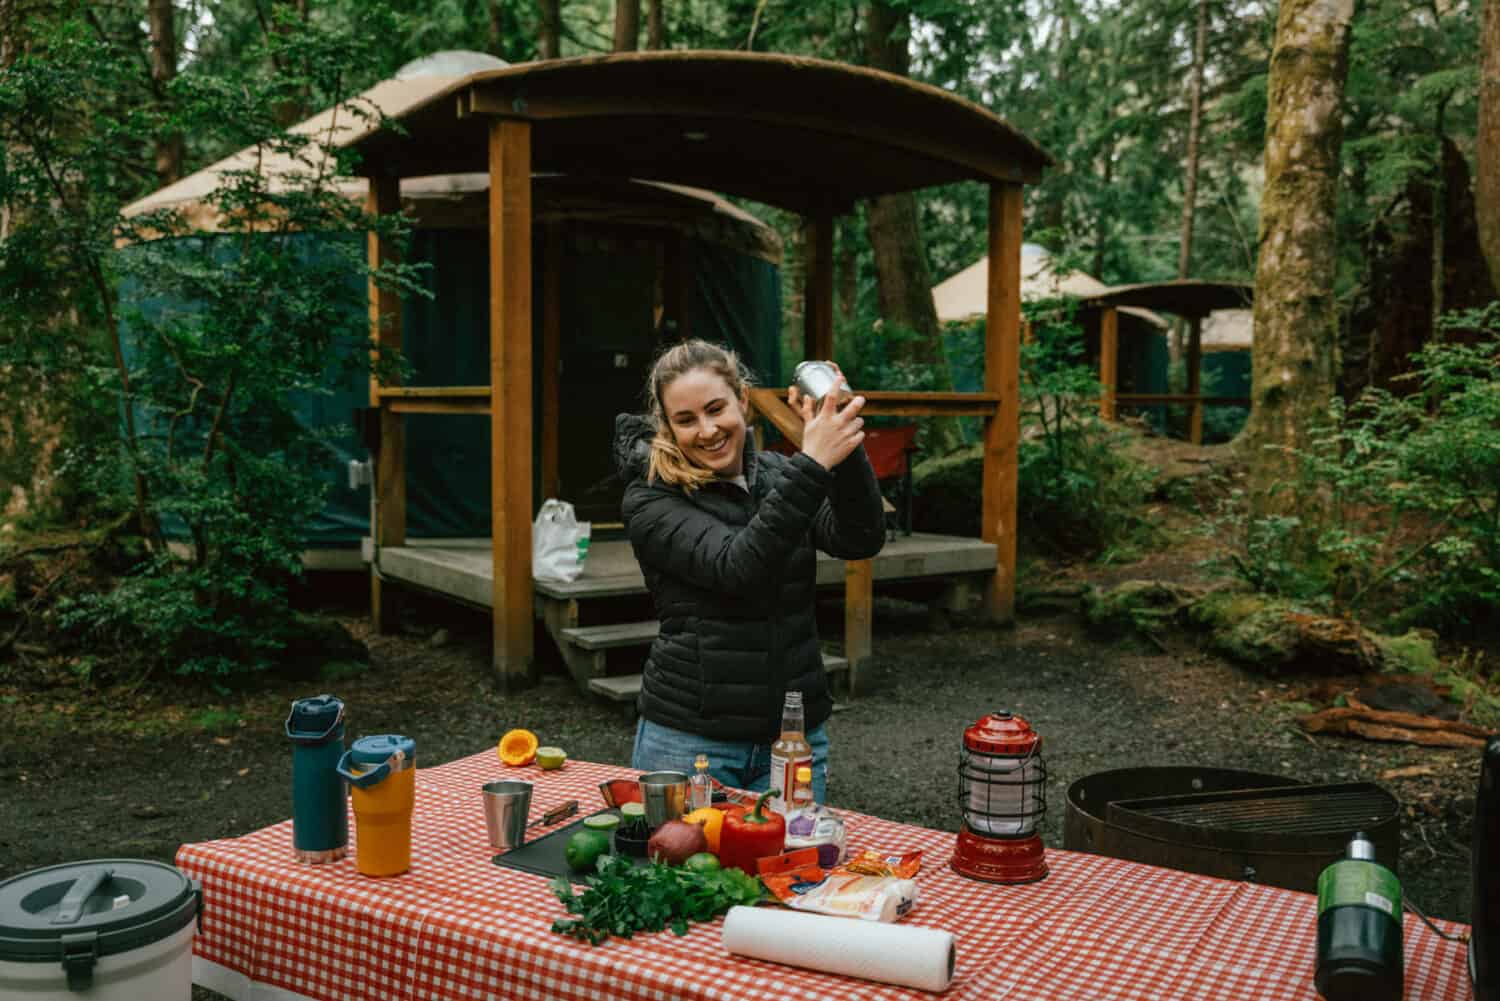 Spring Camping Tips: Make Meals An Event